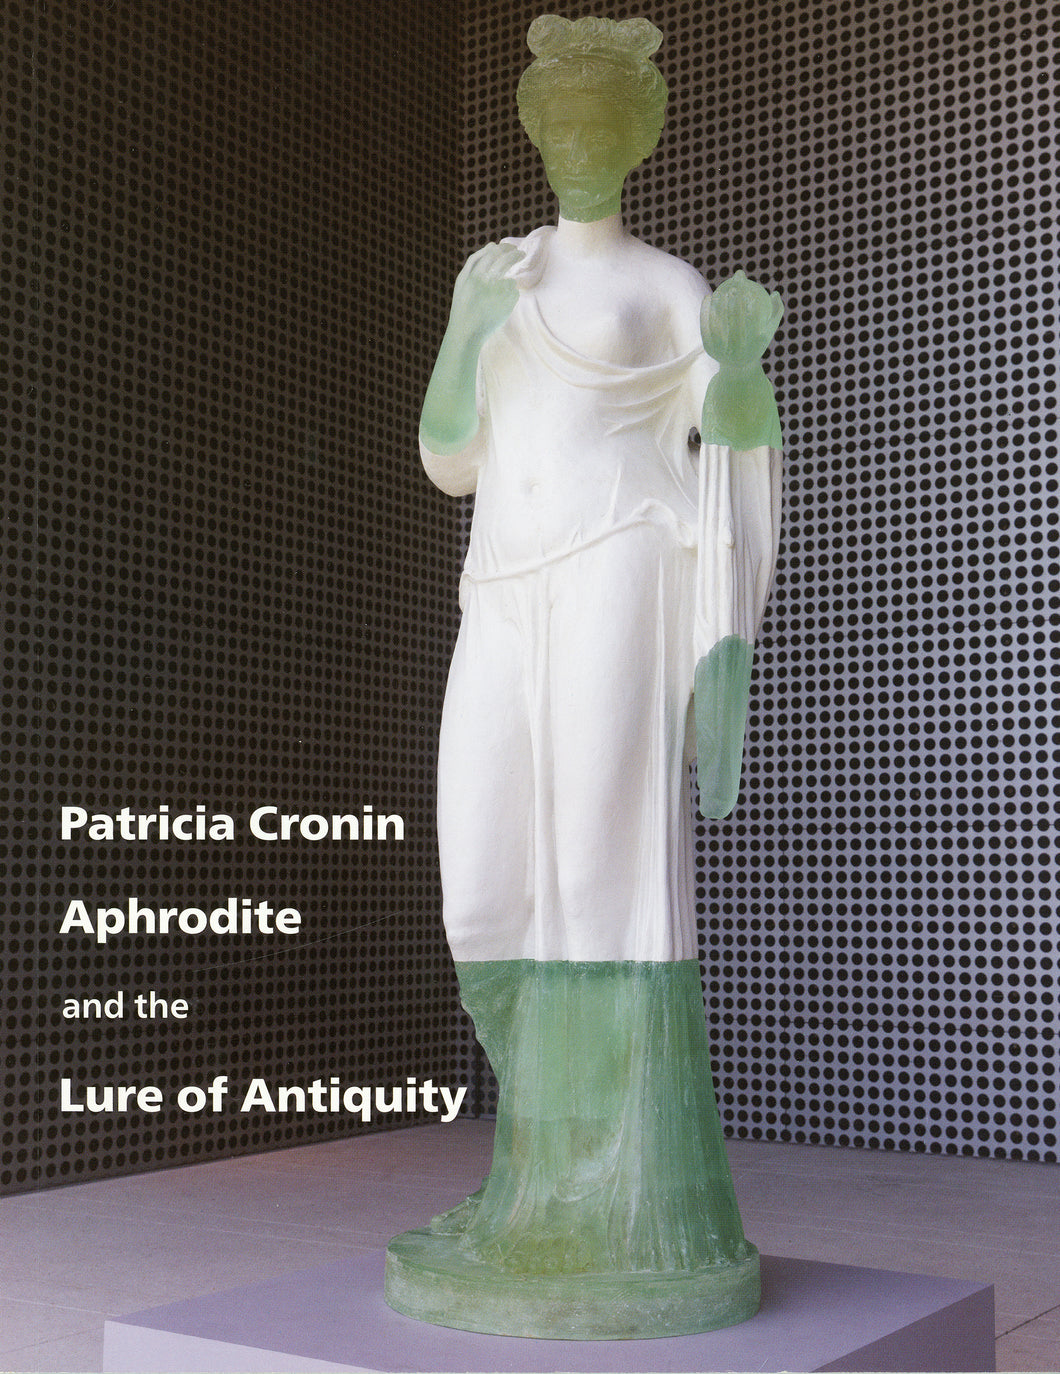 Patricia Cronin Aphrodite and the Lure of Antiquity